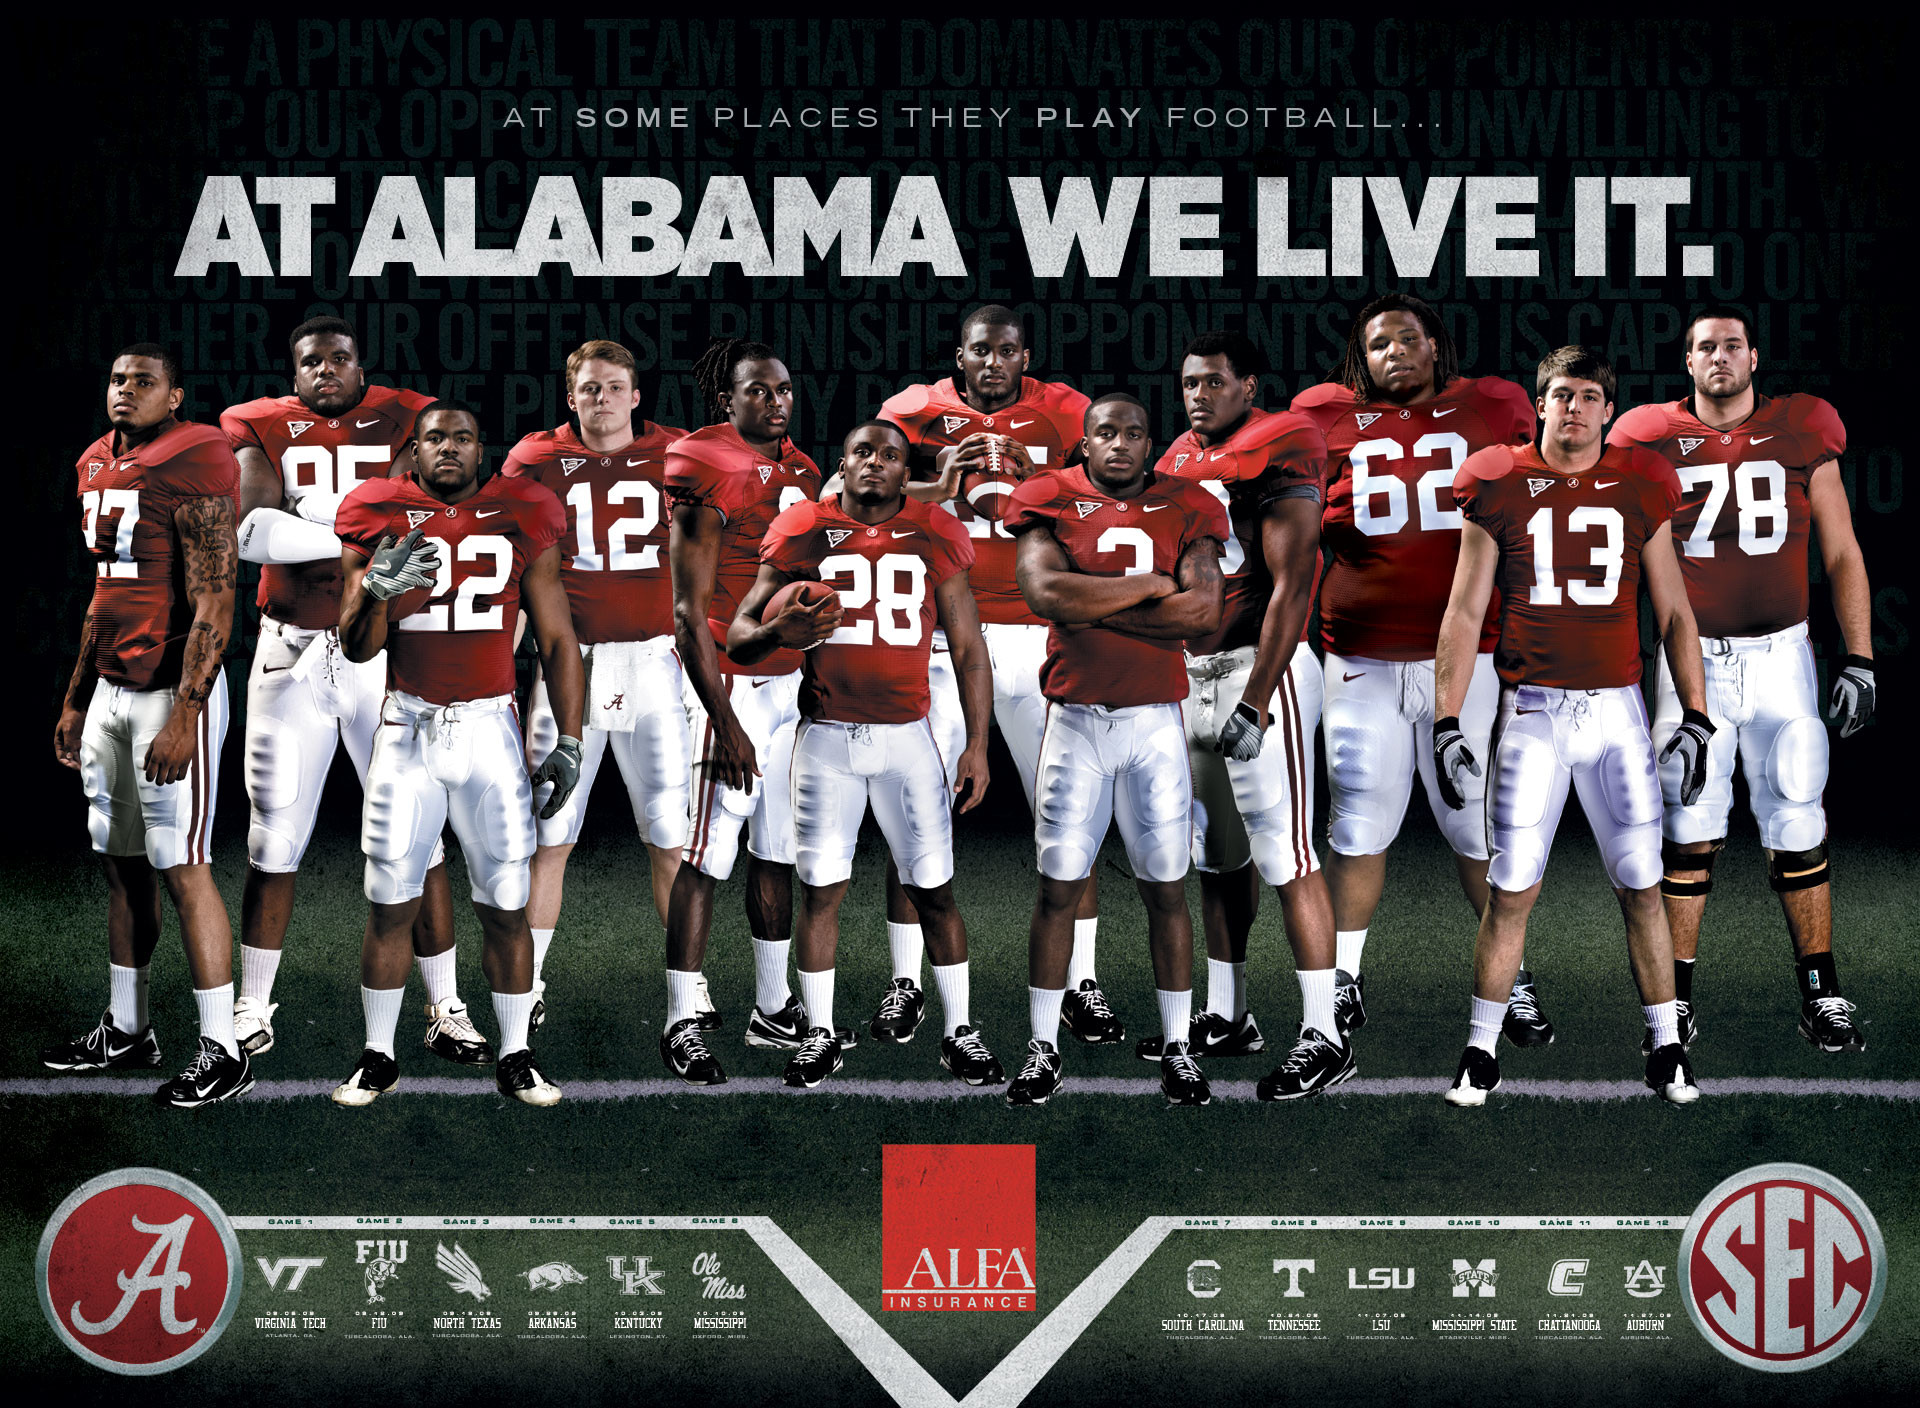 1920x1408 441 best Road to #15 images on Pinterest | Alabama football .